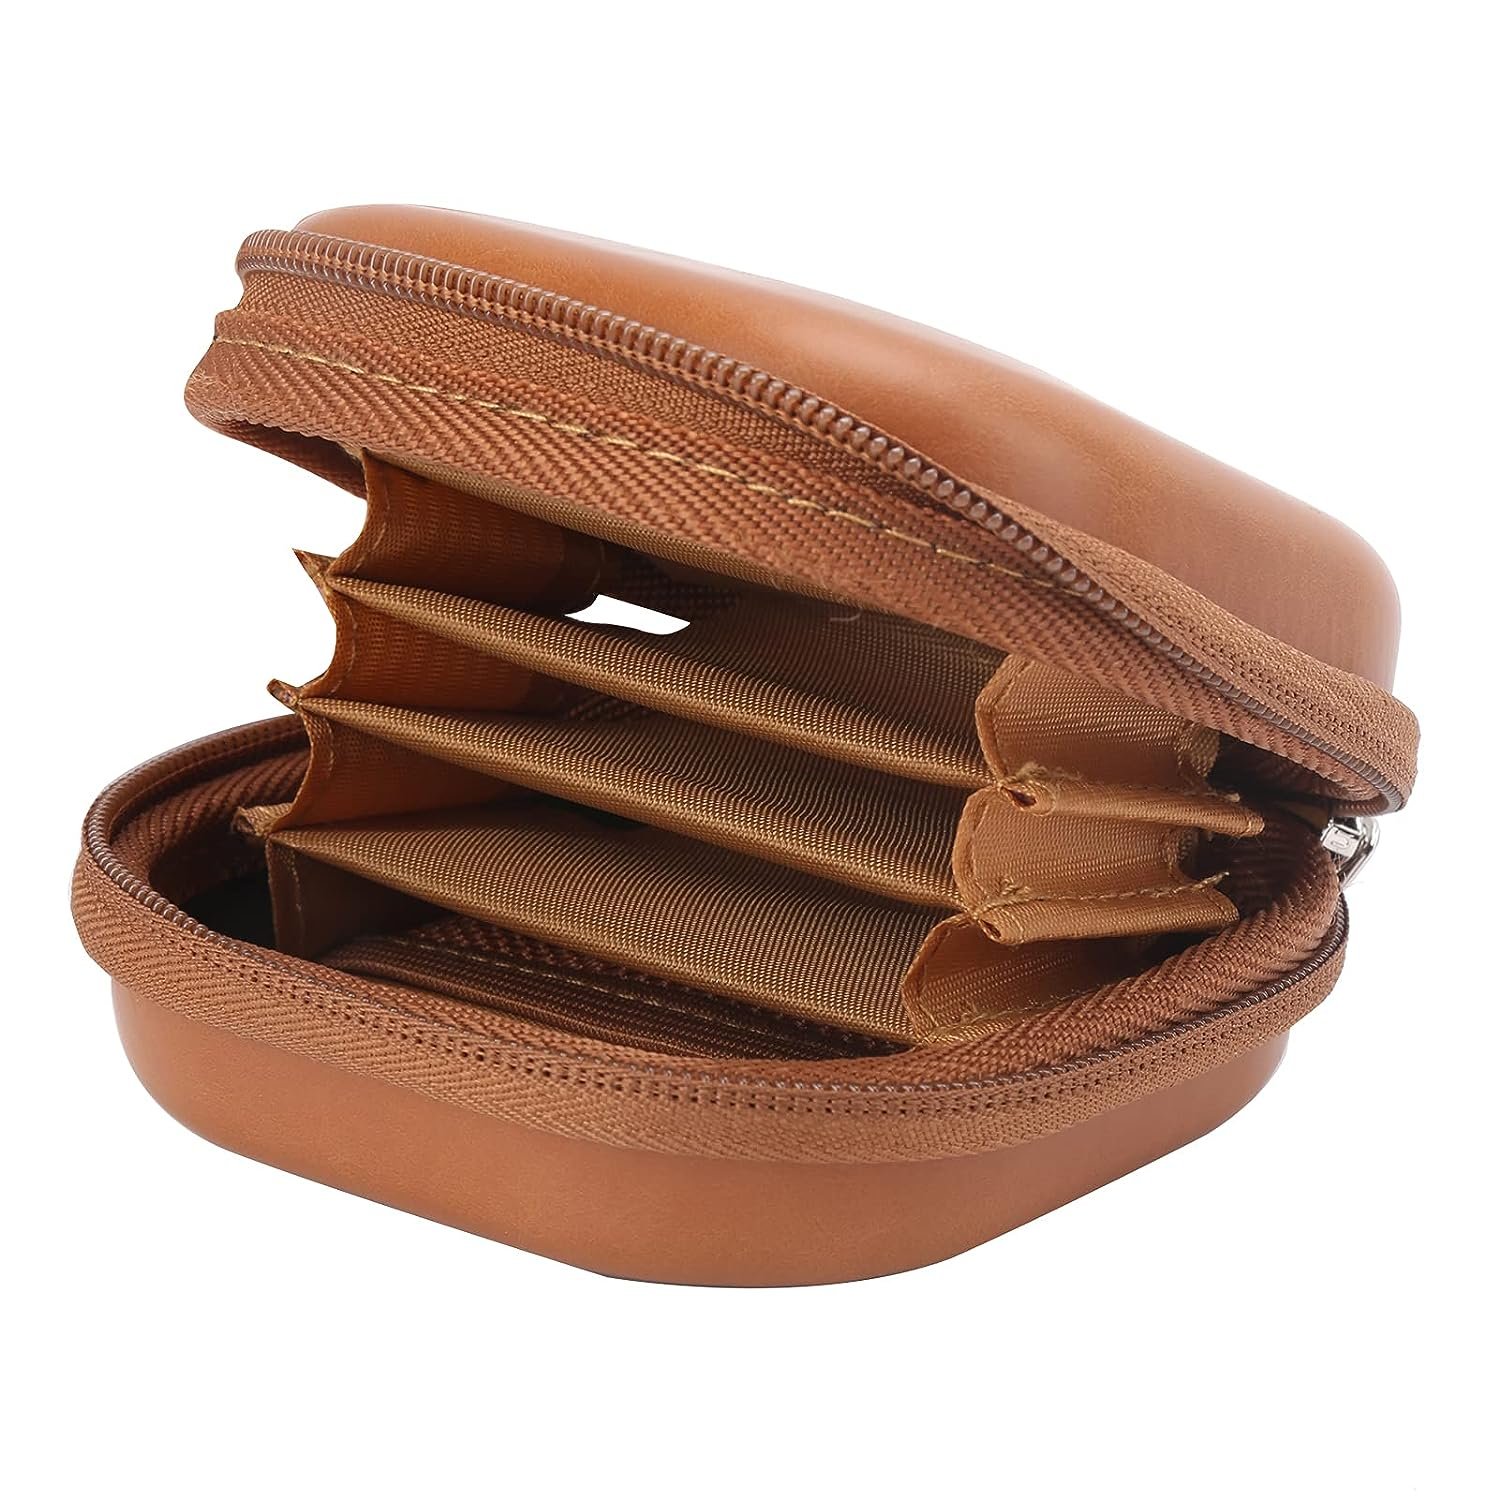 Pu Lens Filter Pouch Case For 5 Circular Filters Up To 82Mm, Circular Lens Filter Protecto